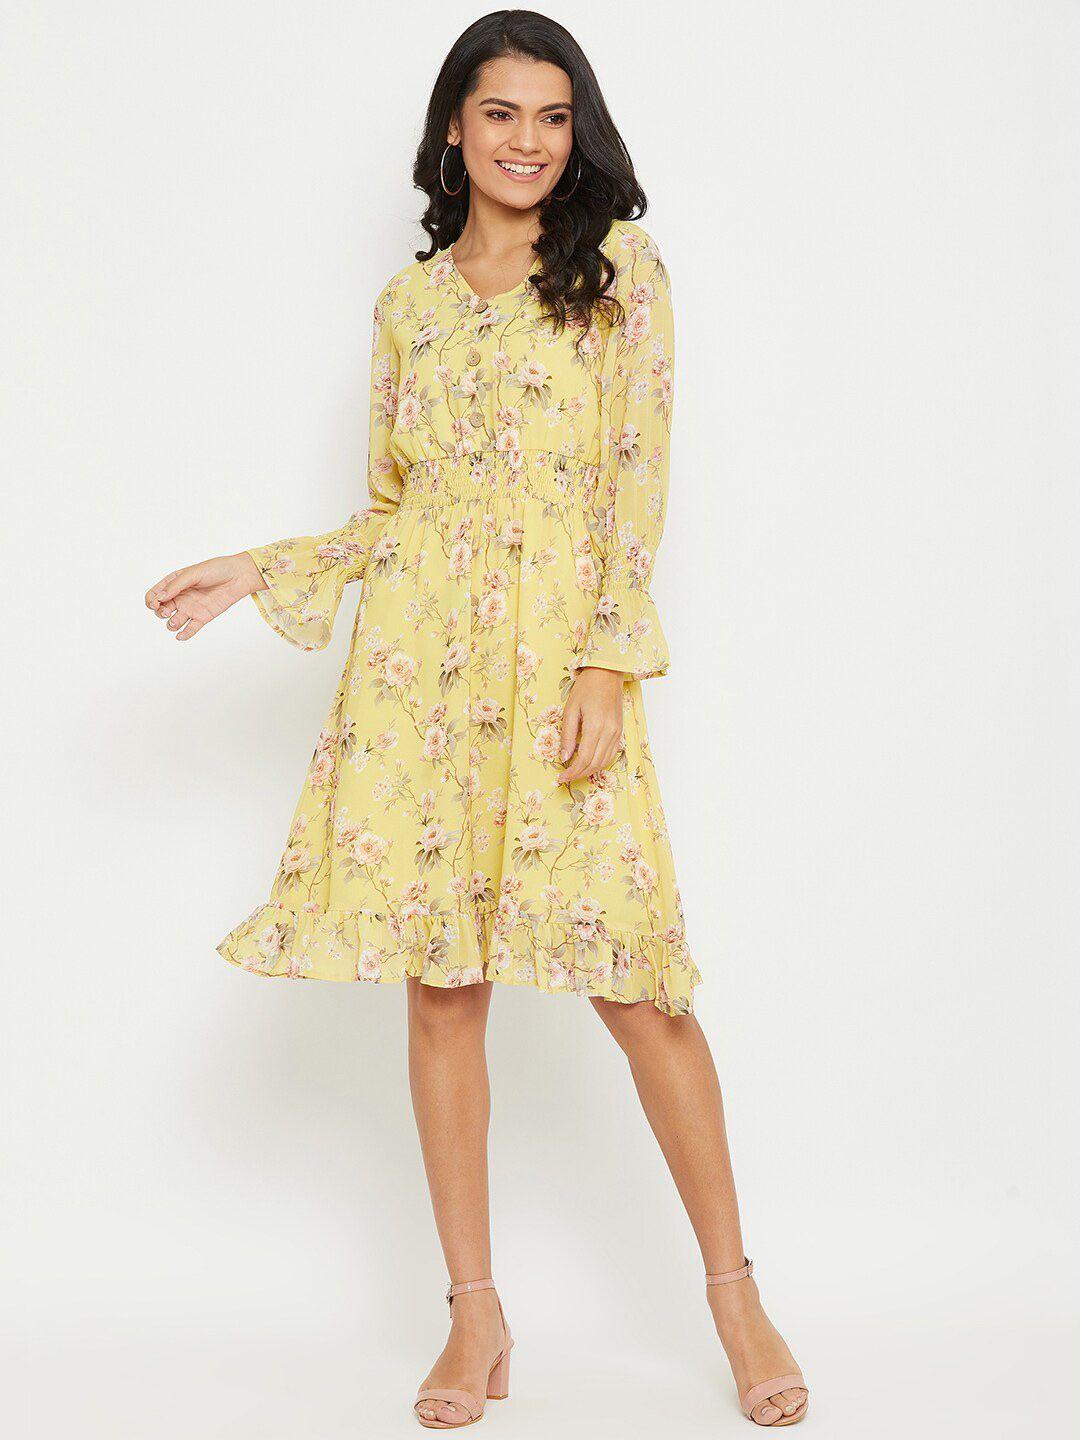 panit yellow floral georgette dress